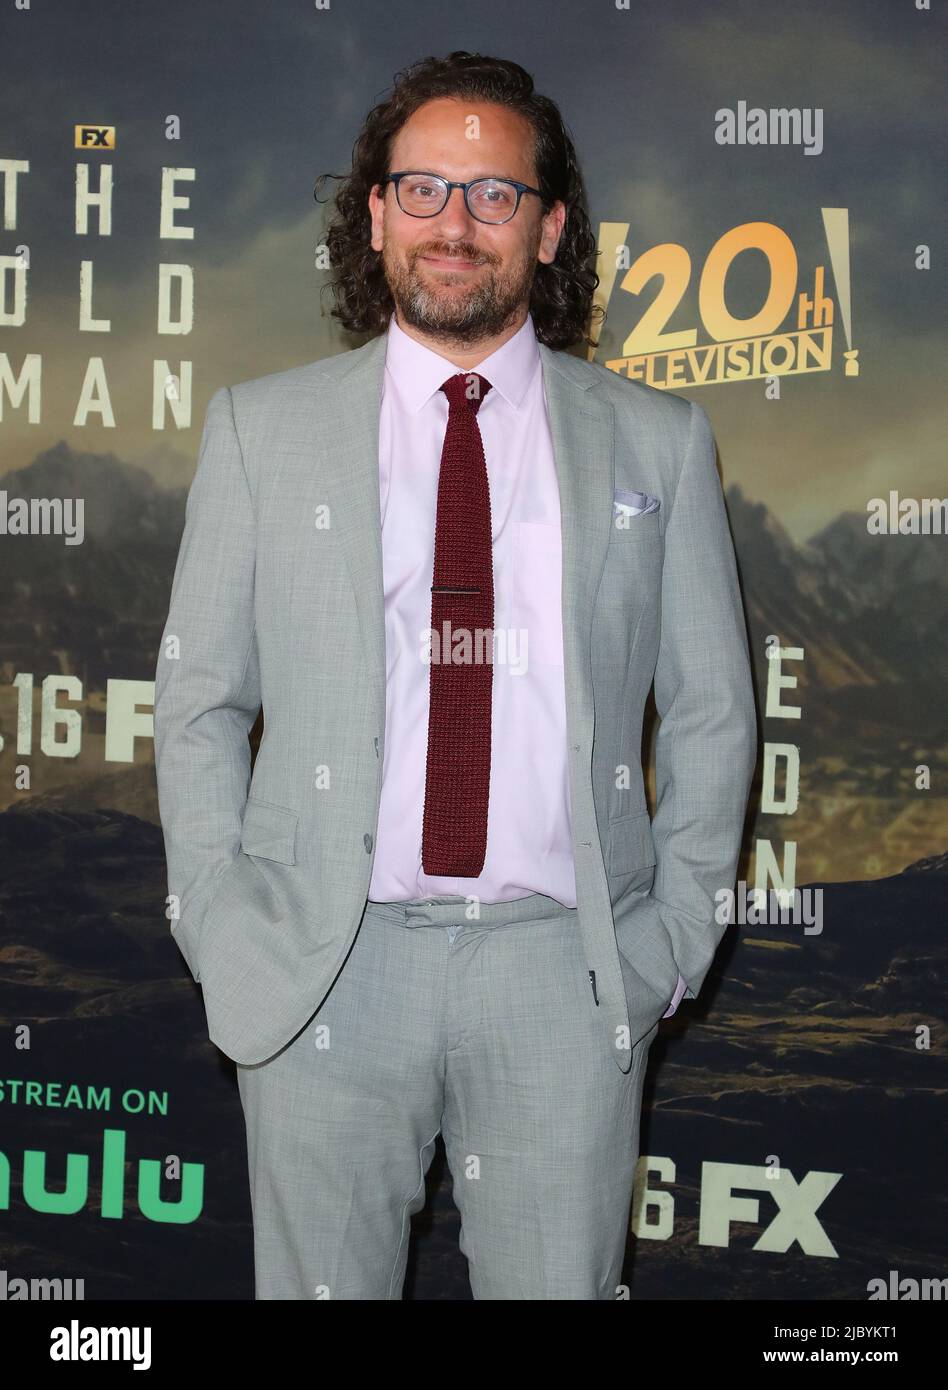 Los Angeles, USA. 08th June, 2022. Robert Levine arrives at The Old Man Season 1 Premiere Red Carpet held at The Academy Museum of Motion Pictures in Los Angeles, CA on Wednesday, June 8, 2022 . (Photo By Juan Pablo Rico/Sipa USA) Credit: Sipa USA/Alamy Live News Stock Photo